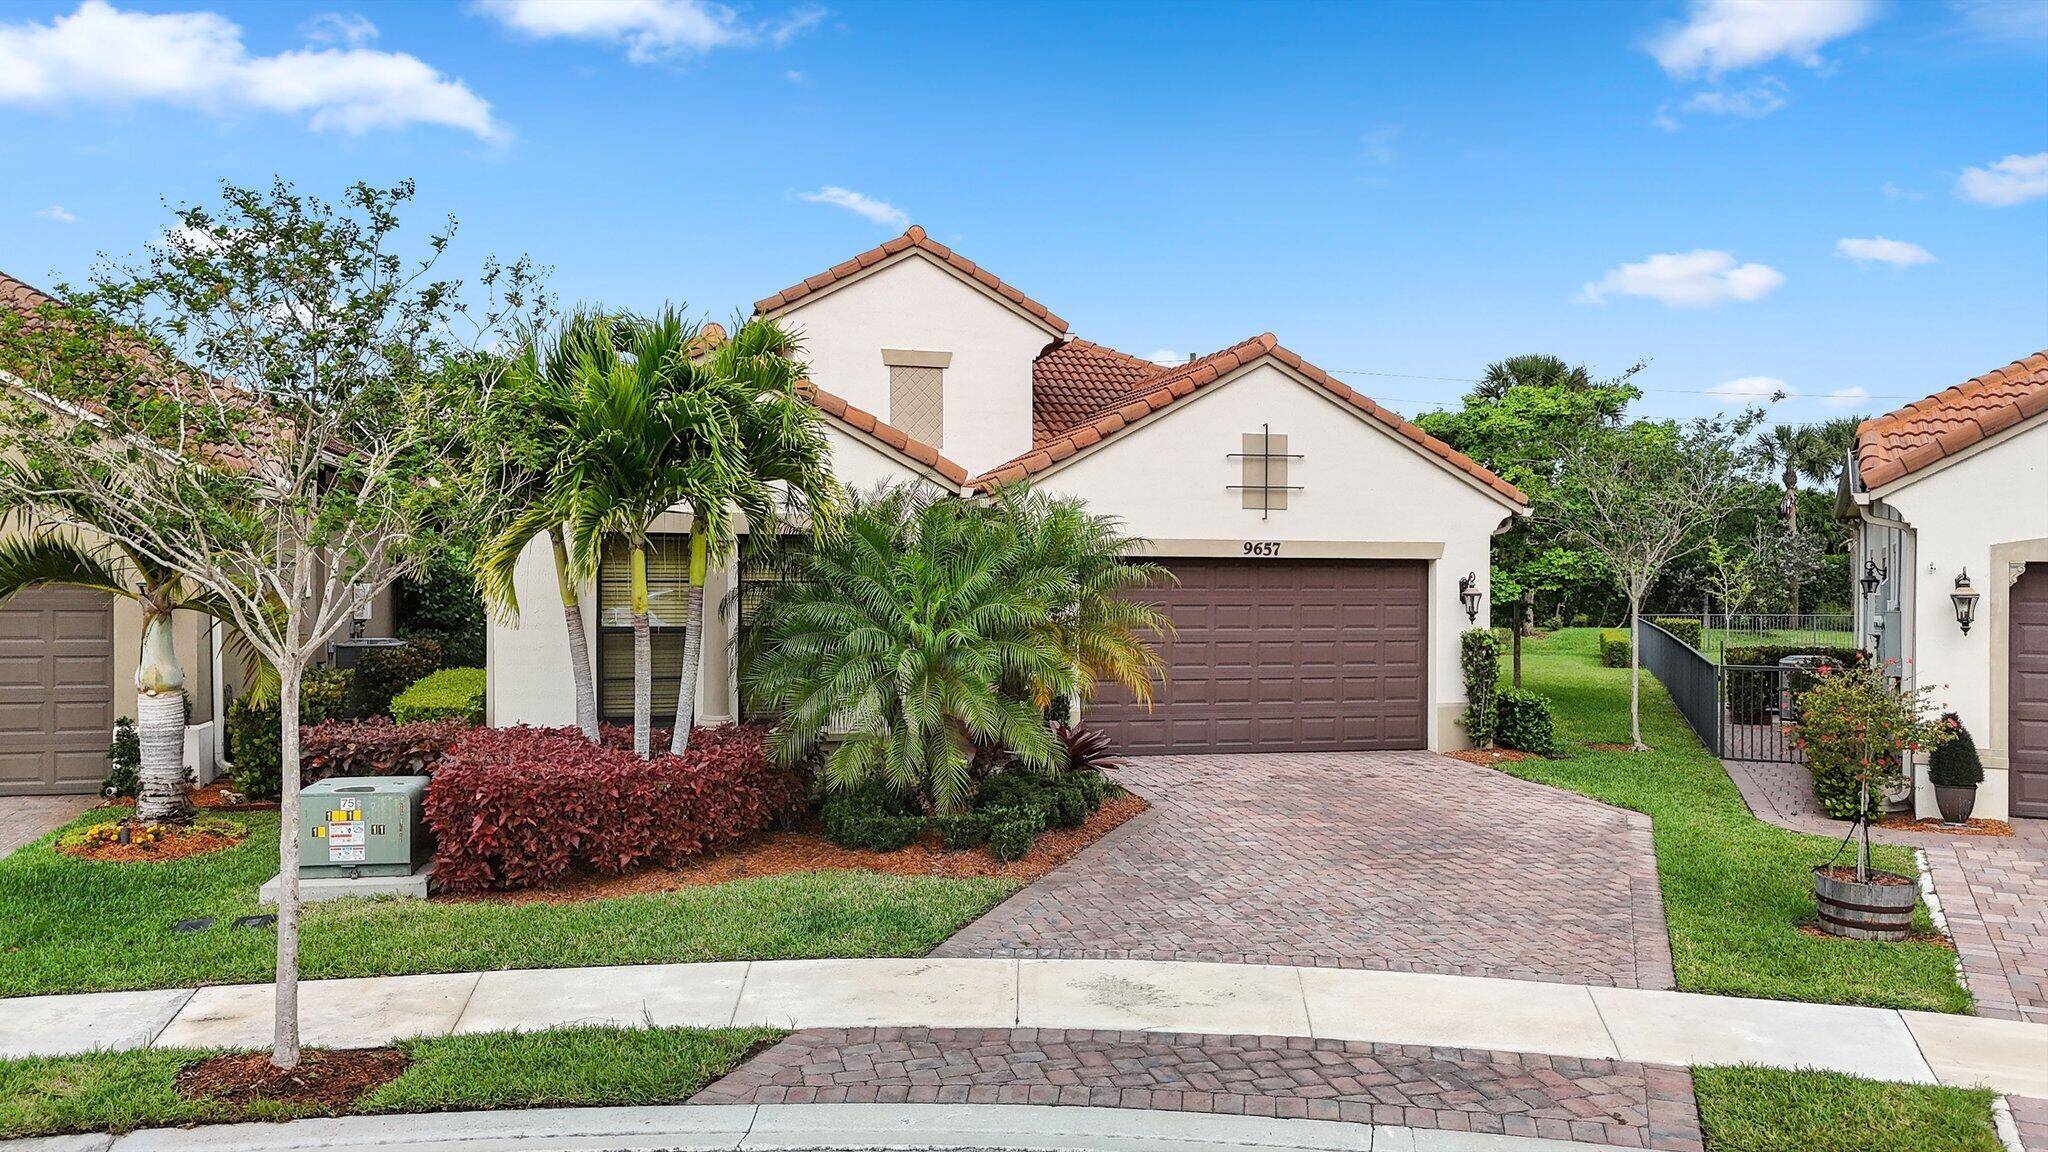 Welcome to 9657 Kalmar Circle West, a spacious and inviting home in Parkland, FL.